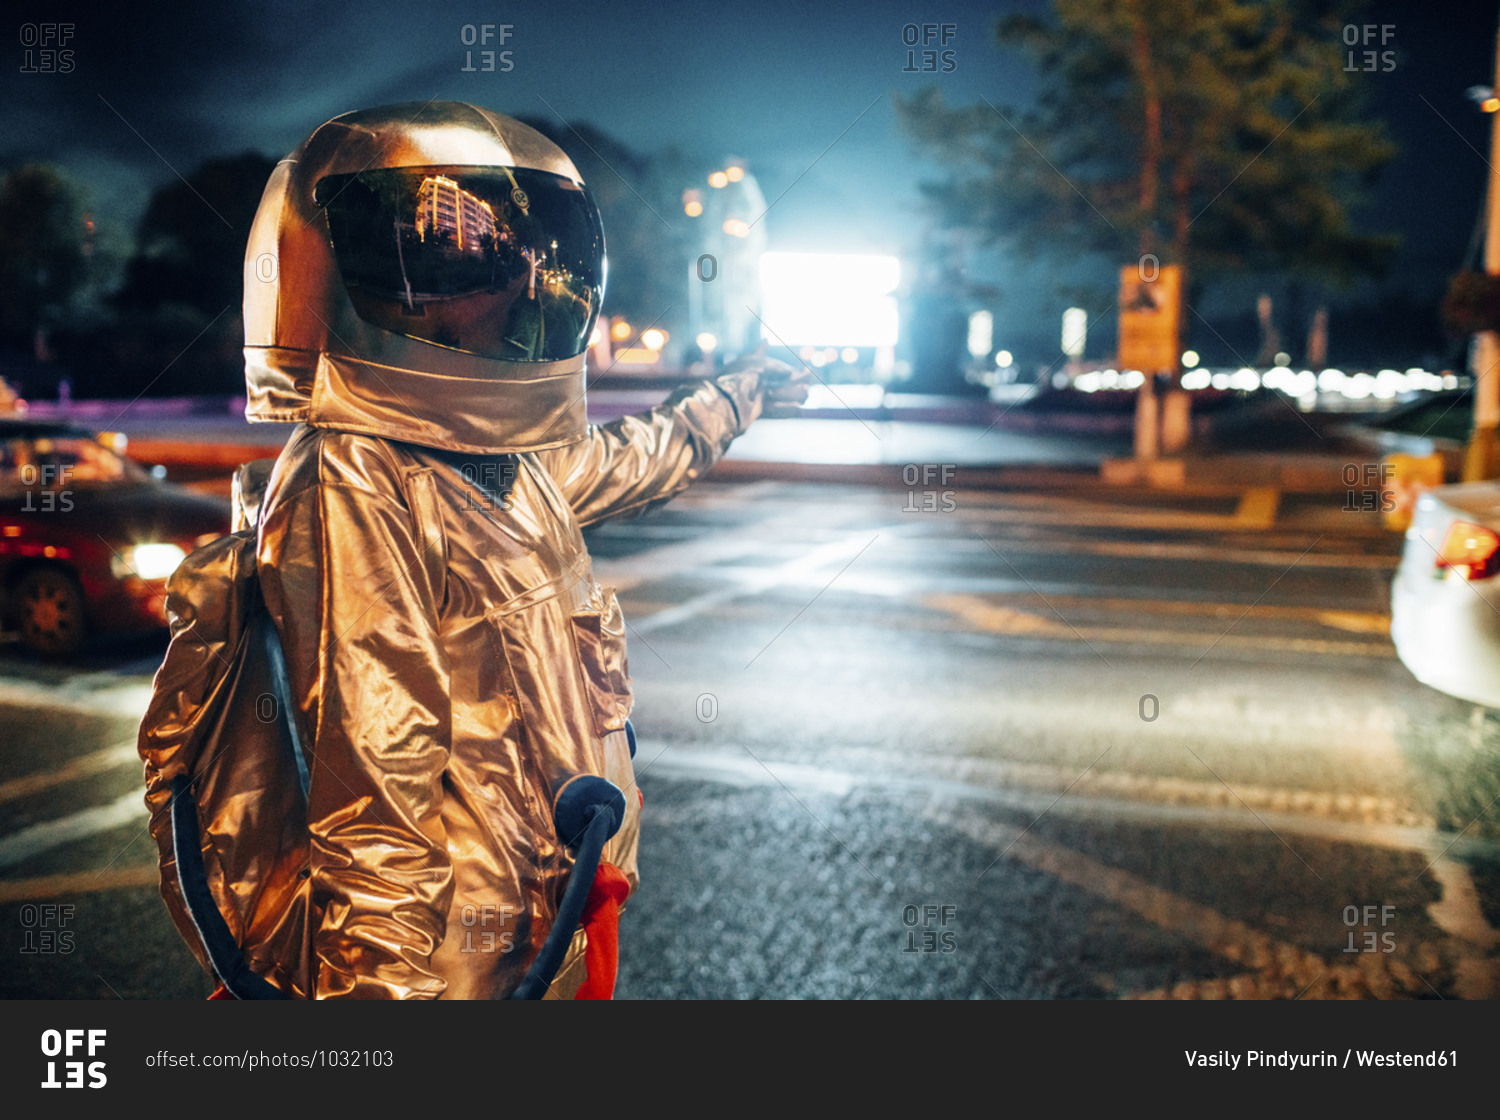 Spaceman on a street in the city at night pointing at shining projection screen